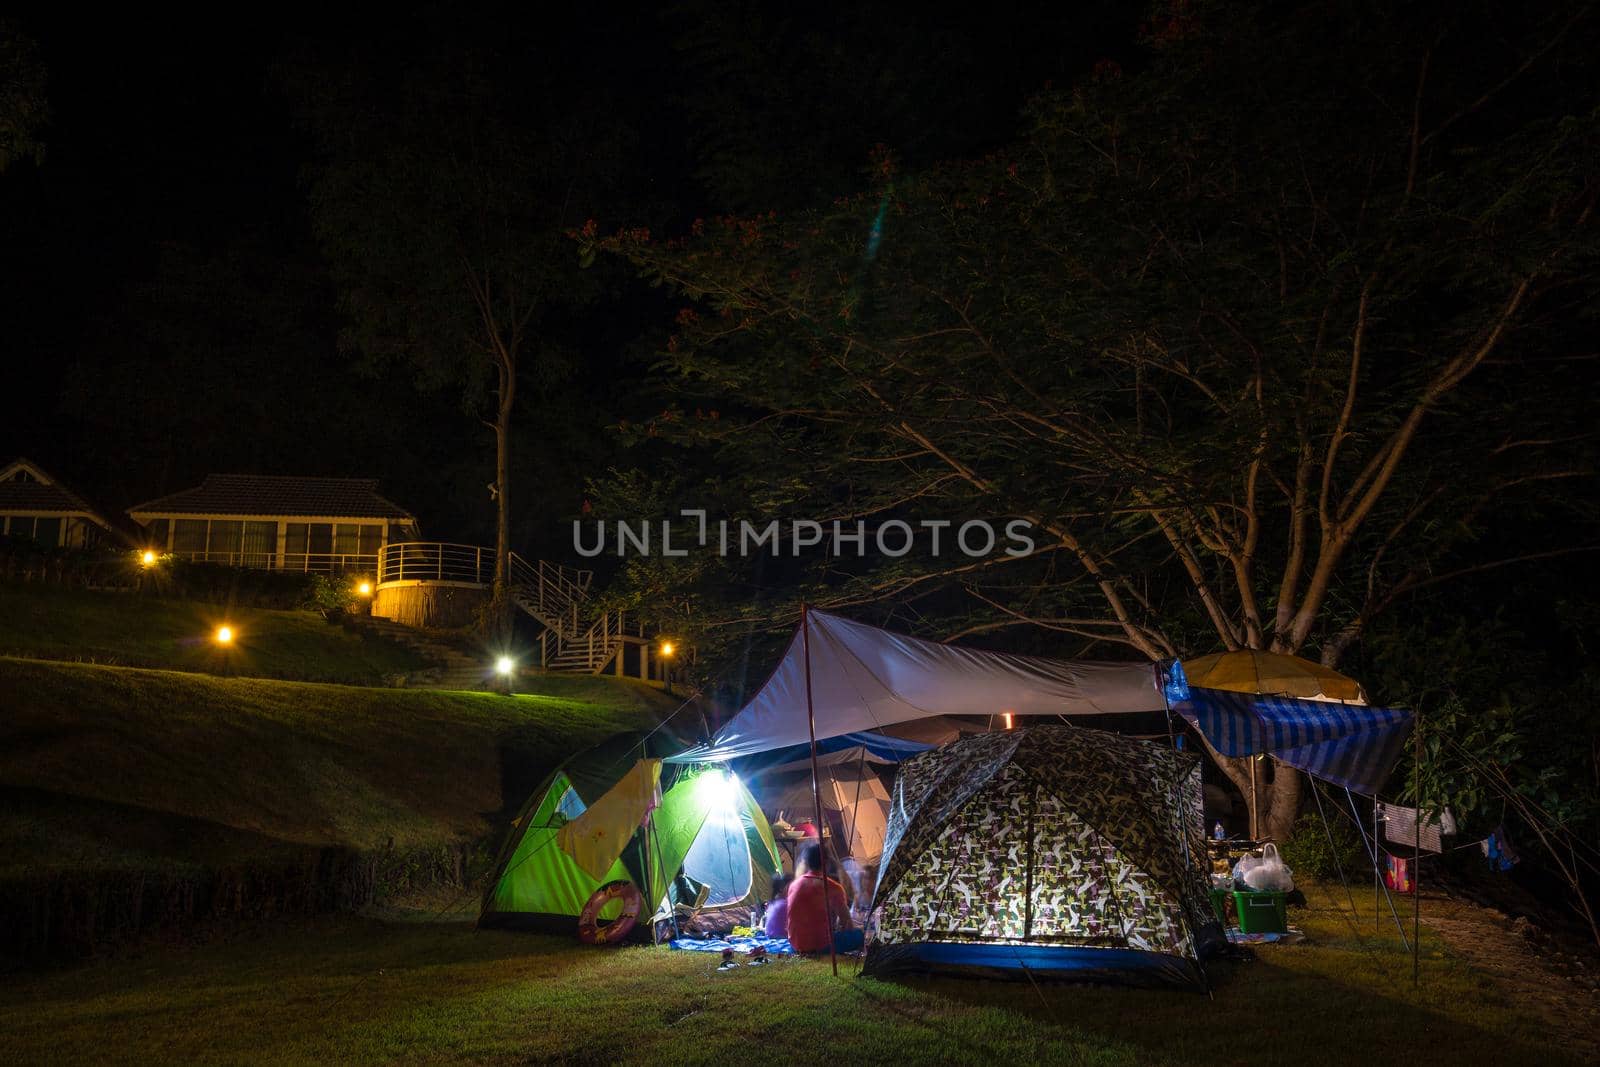 Camping and tent in the park at night